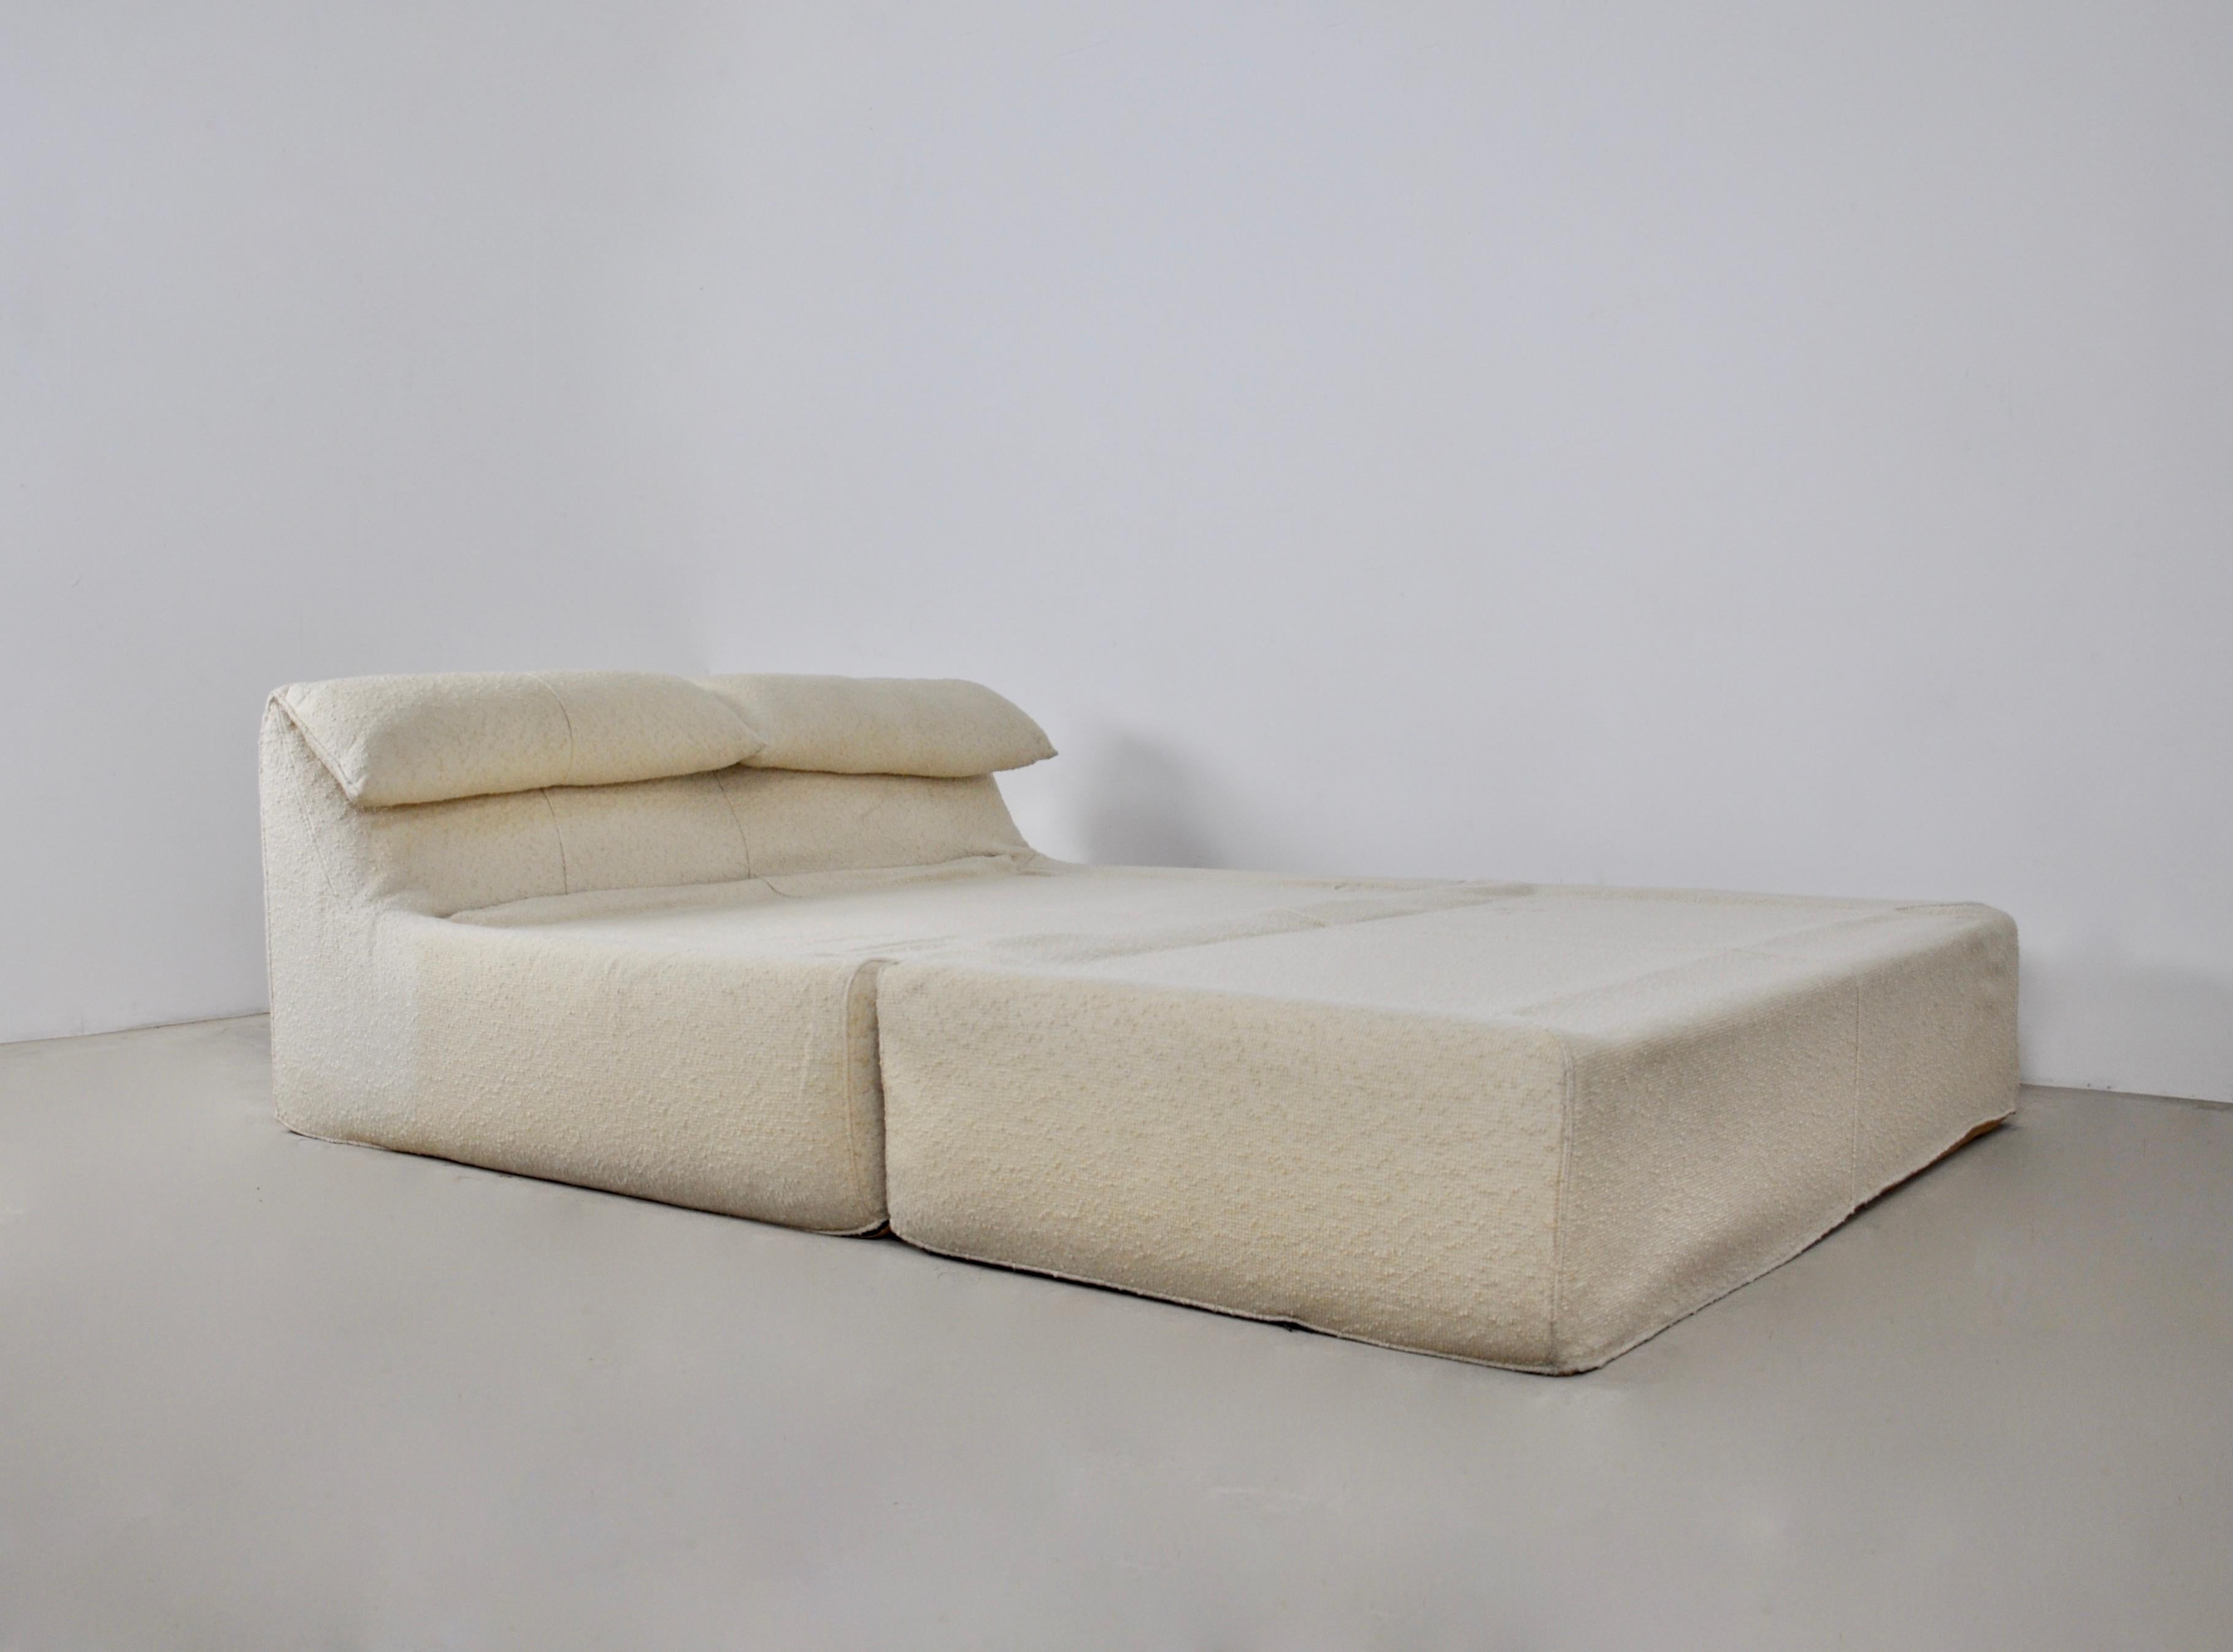 Daybed in white fabric. Stamp under the seat. No tear or big stain. Height of the seat : 37cm. Depth closed: 127cm. Wear due to time and age of the daybed.
 